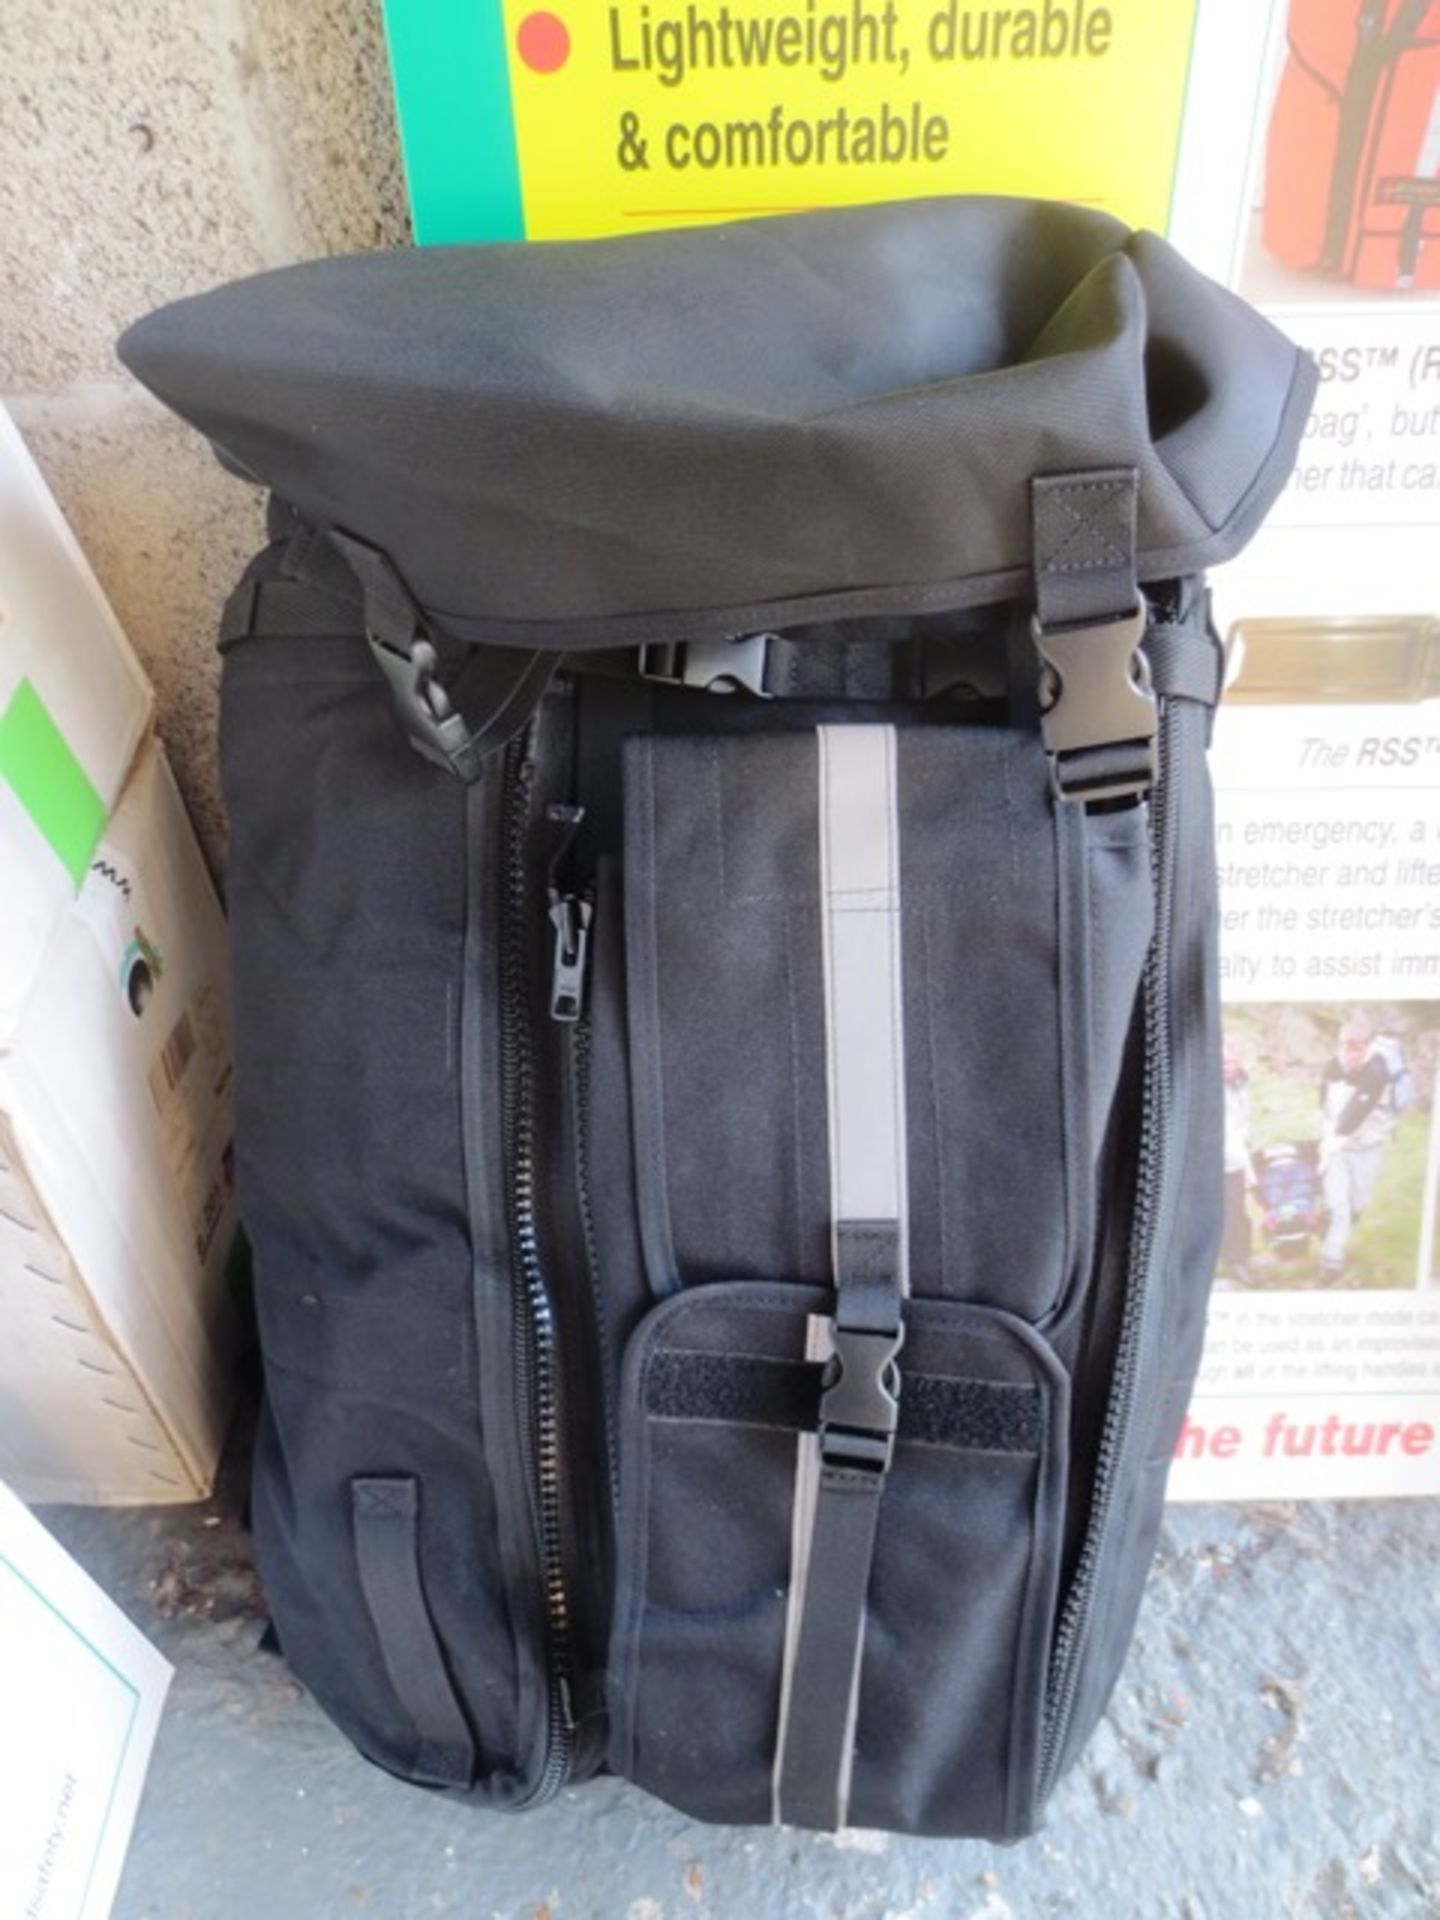 Black Rucksack Stretcher Systems (RSS) Day sack/grab bag, fold out rucksack stretcher, with